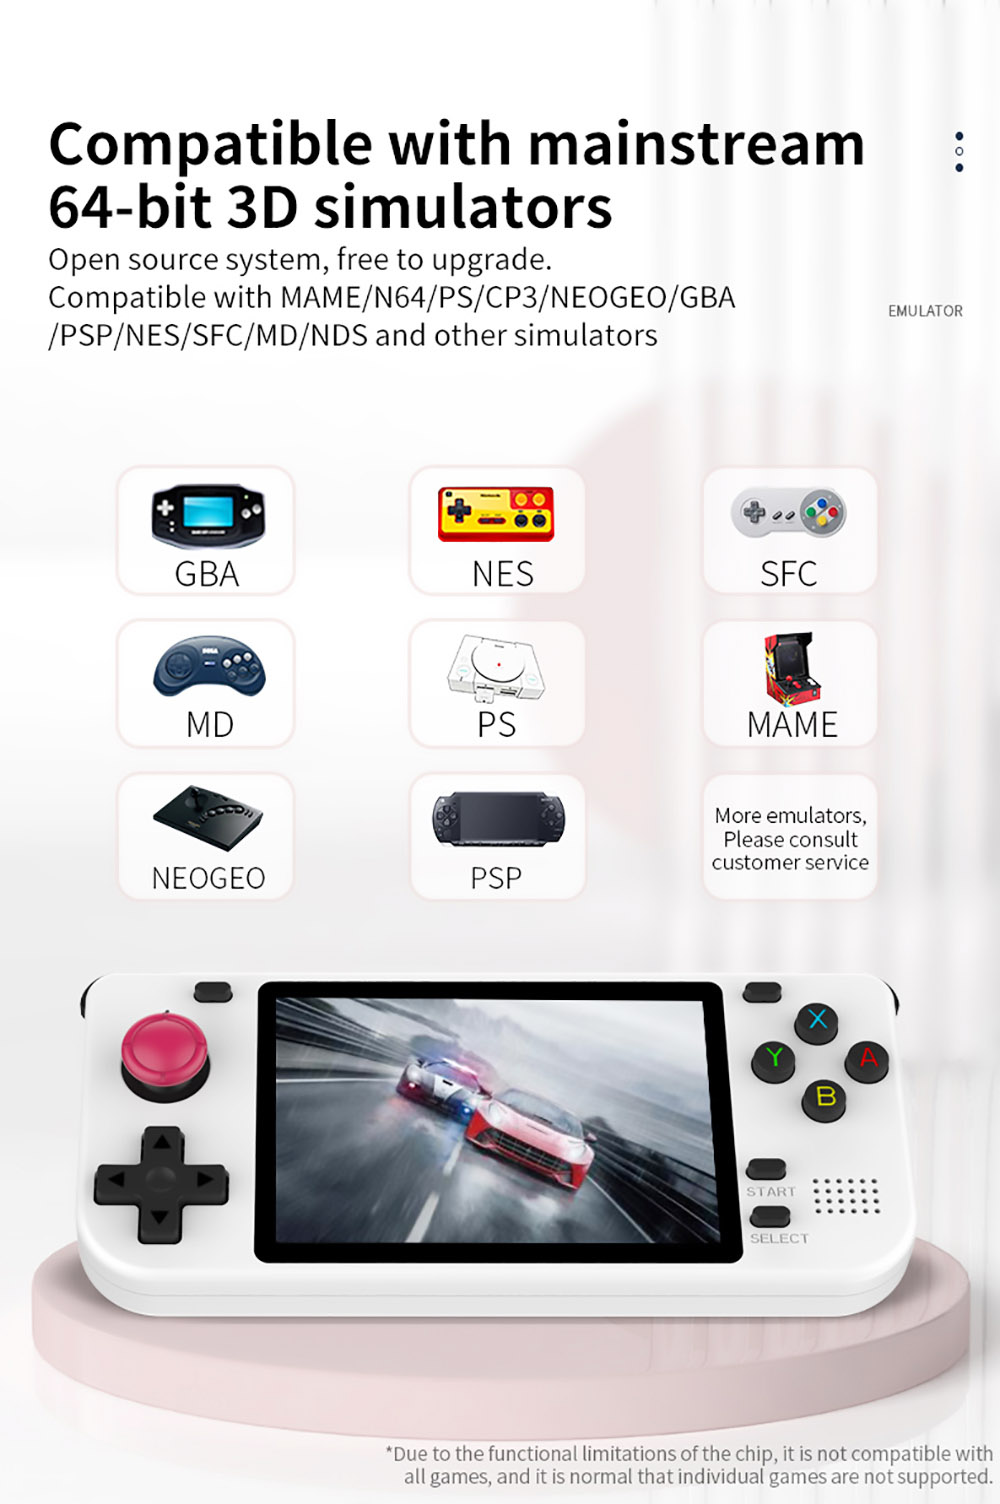 Powkiddy RGB10S 128GB Handheld Game Console, 3.5'' IPS OGA Screen 10,000 Games Open Source for Linux - White